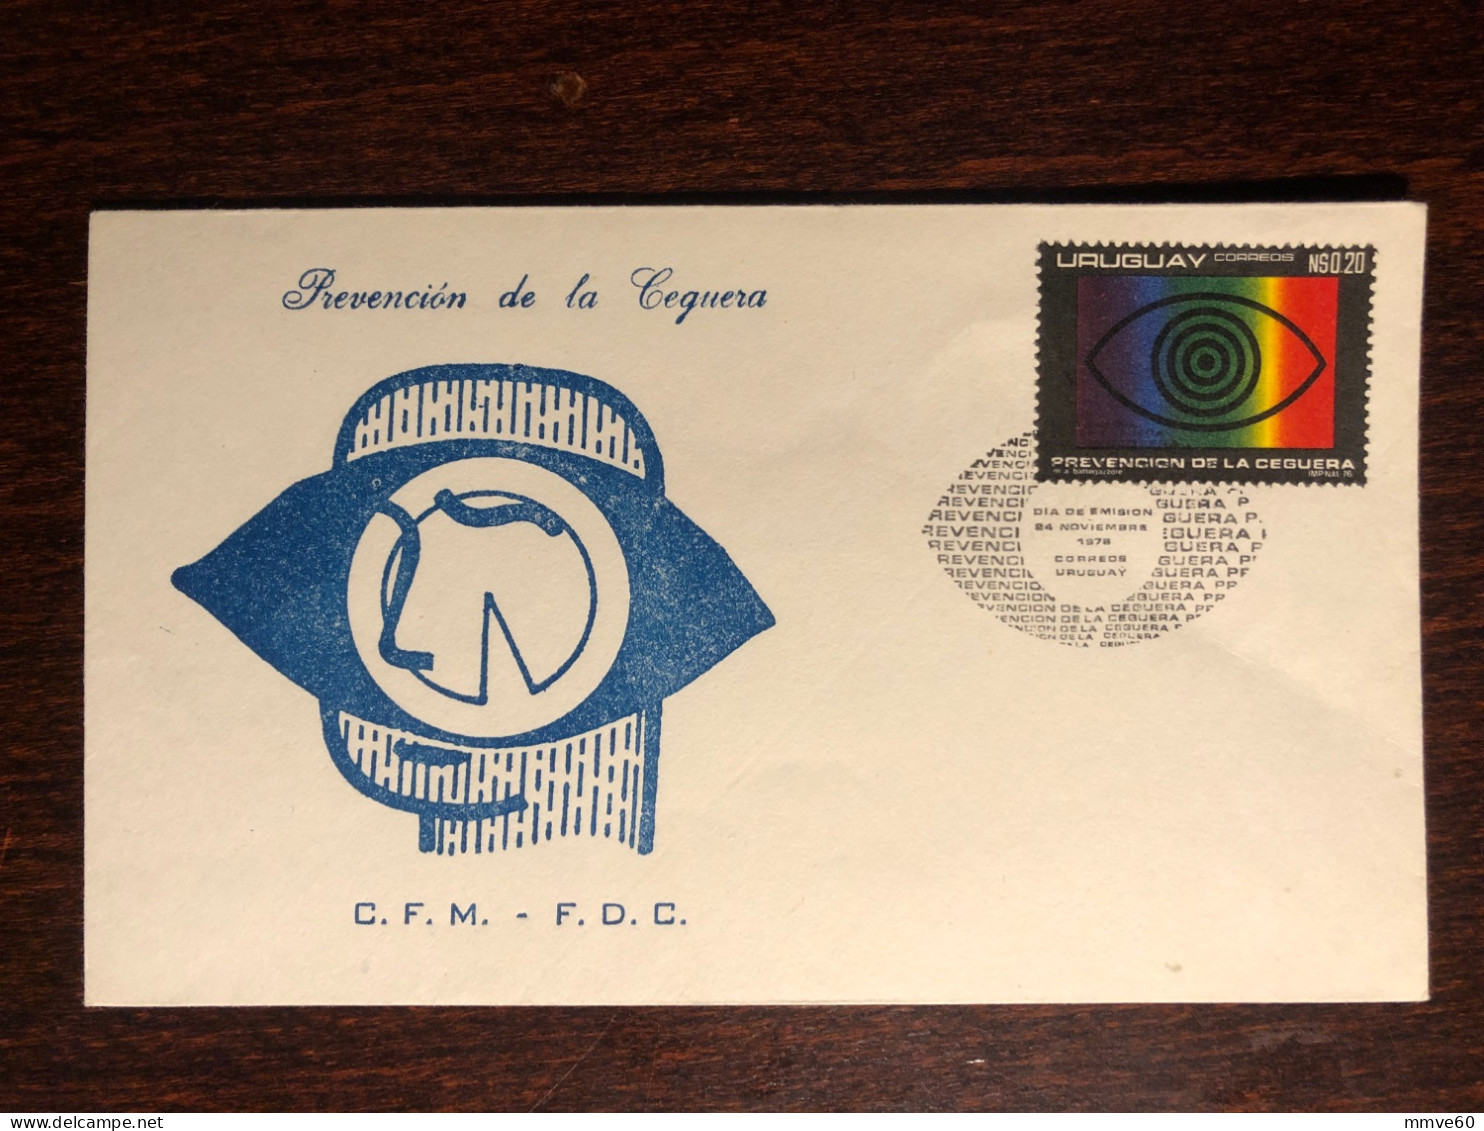 URUGUAY FDC COVER 1976 YEAR OPHTHALMOLOGY BLINDNESS HEALTH MEDICINE STAMPS - Uruguay